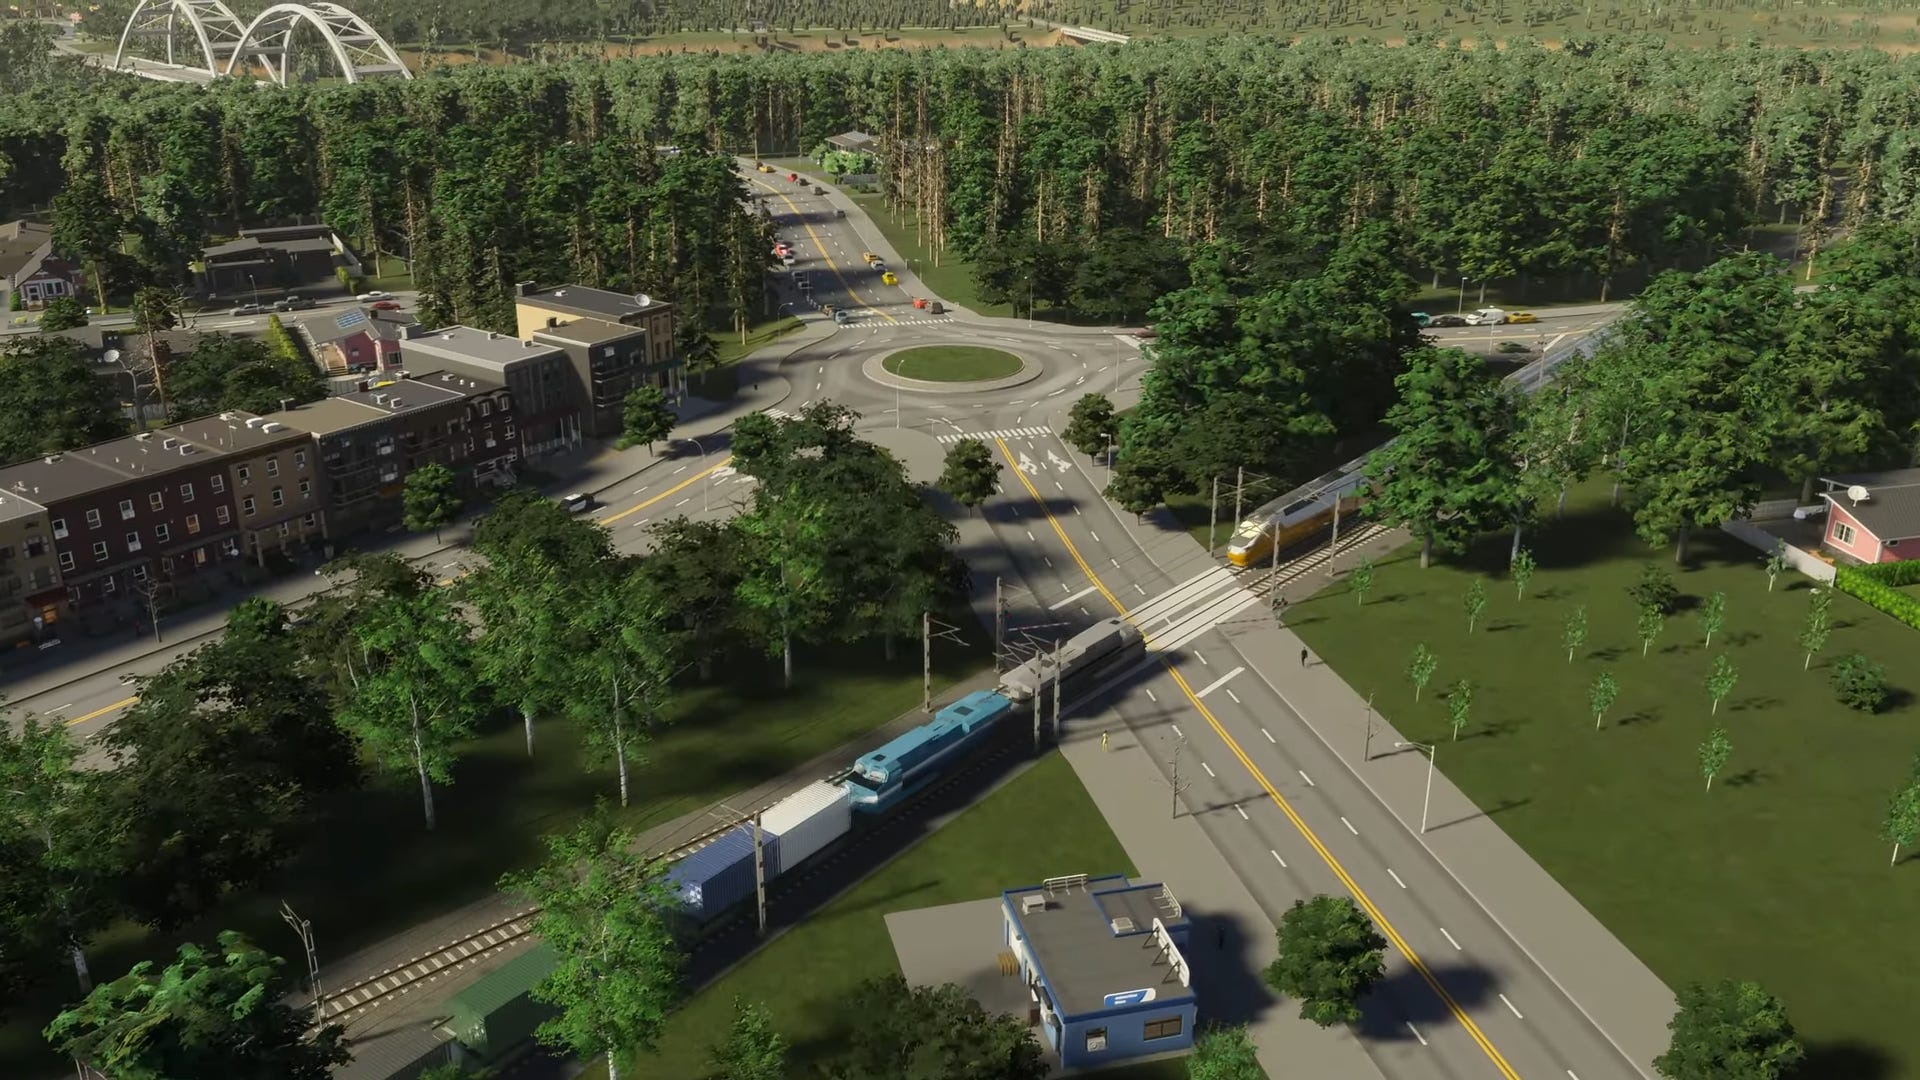 Cities: Skylines 2 dev says "biggest regret" is missing mod support as it continues to fix game